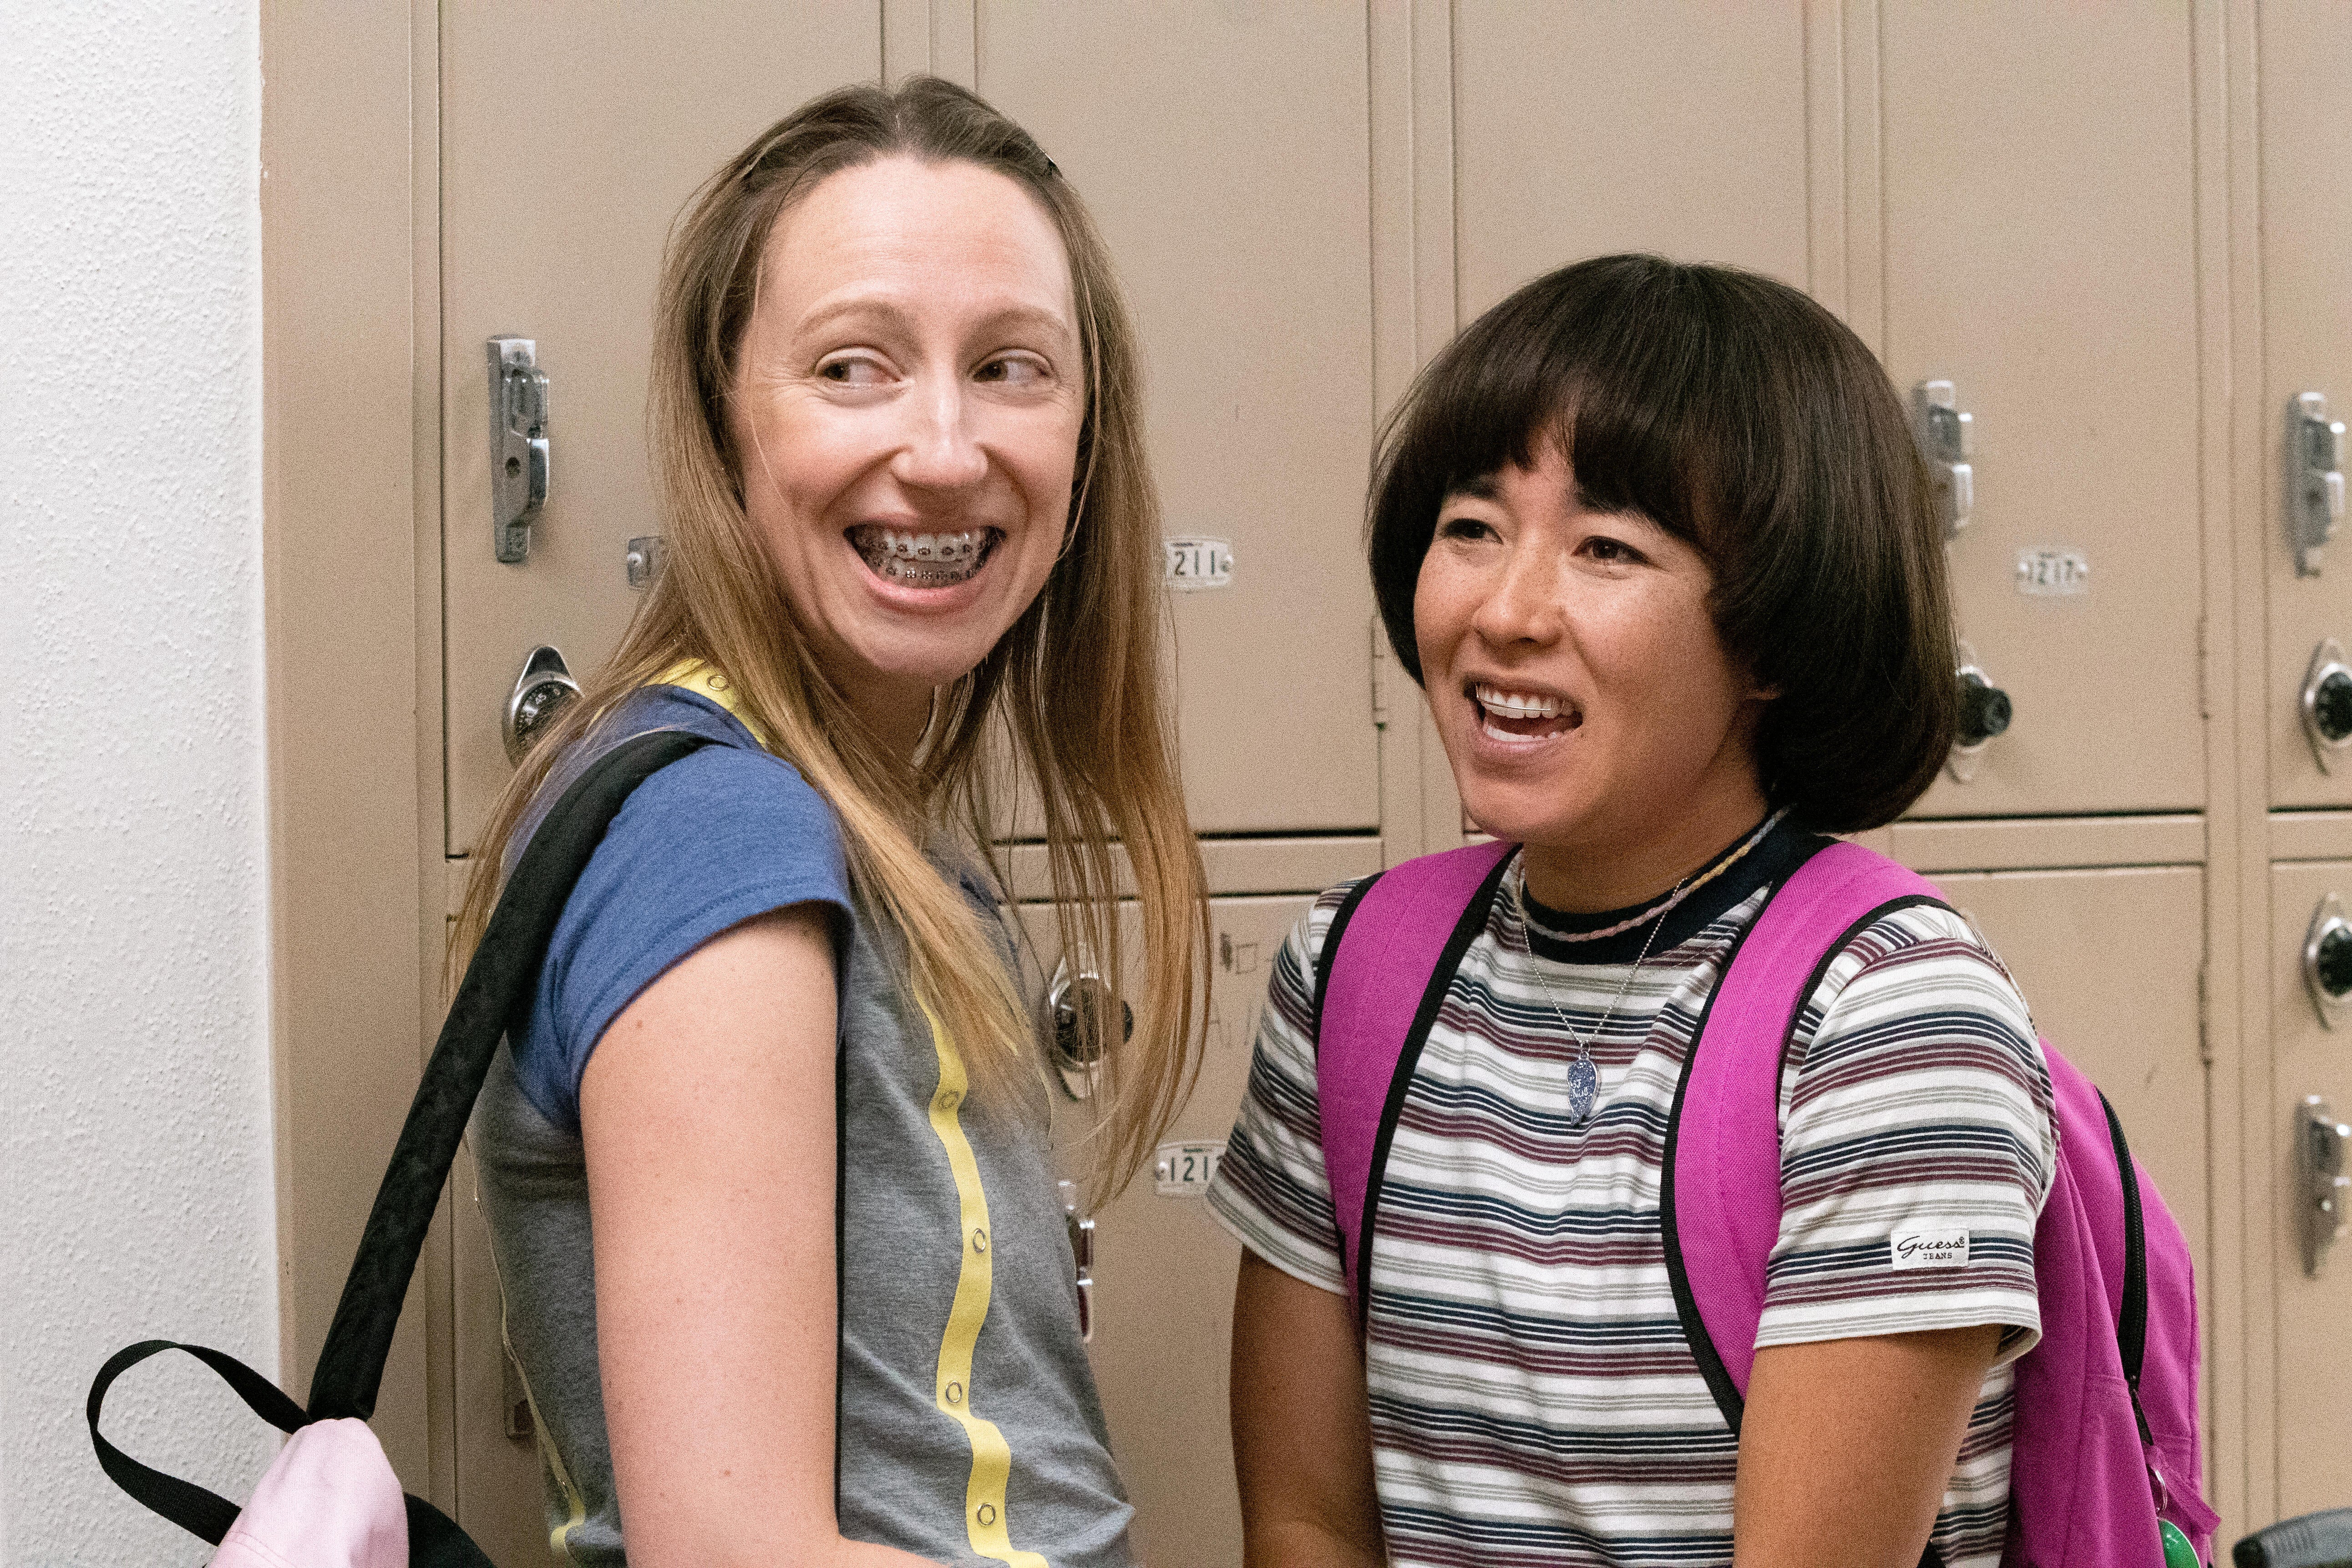 Two teenage girls, one with braces, smile awkwardly in a middle-school hallway.